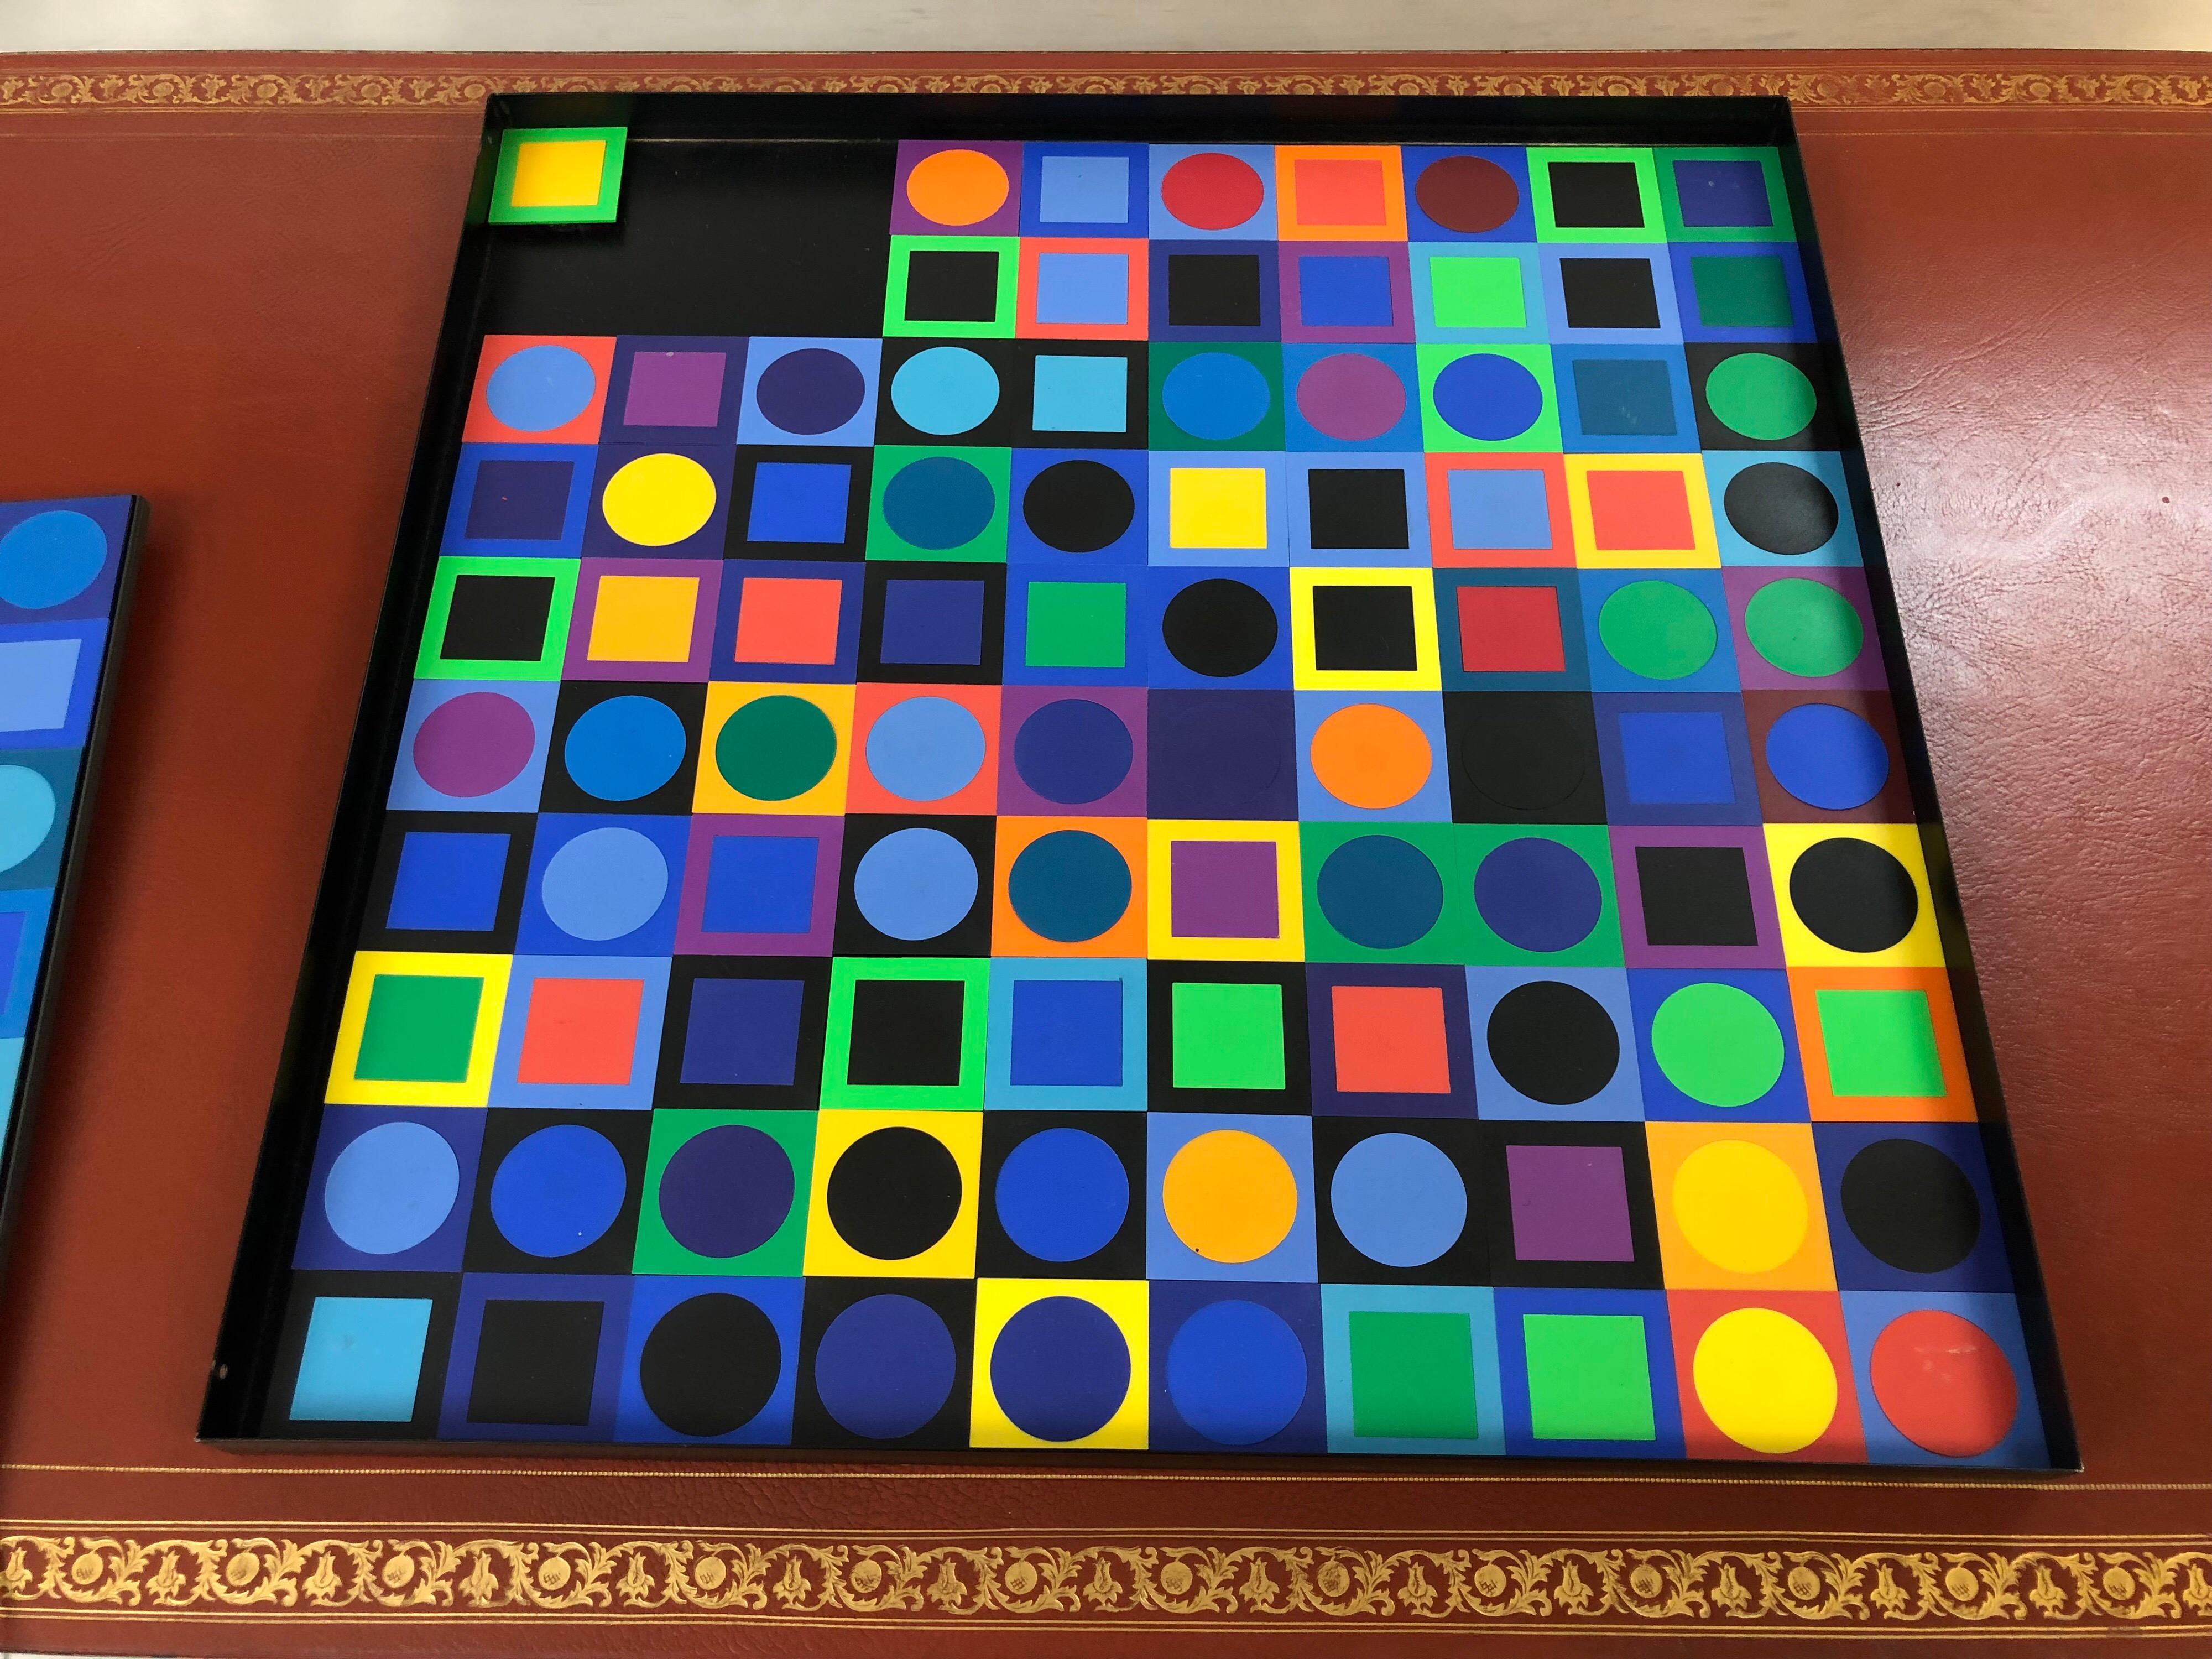 Swiss Vasarely Planetary Folklore Participation No 1 Op Art Puzzle, 1969